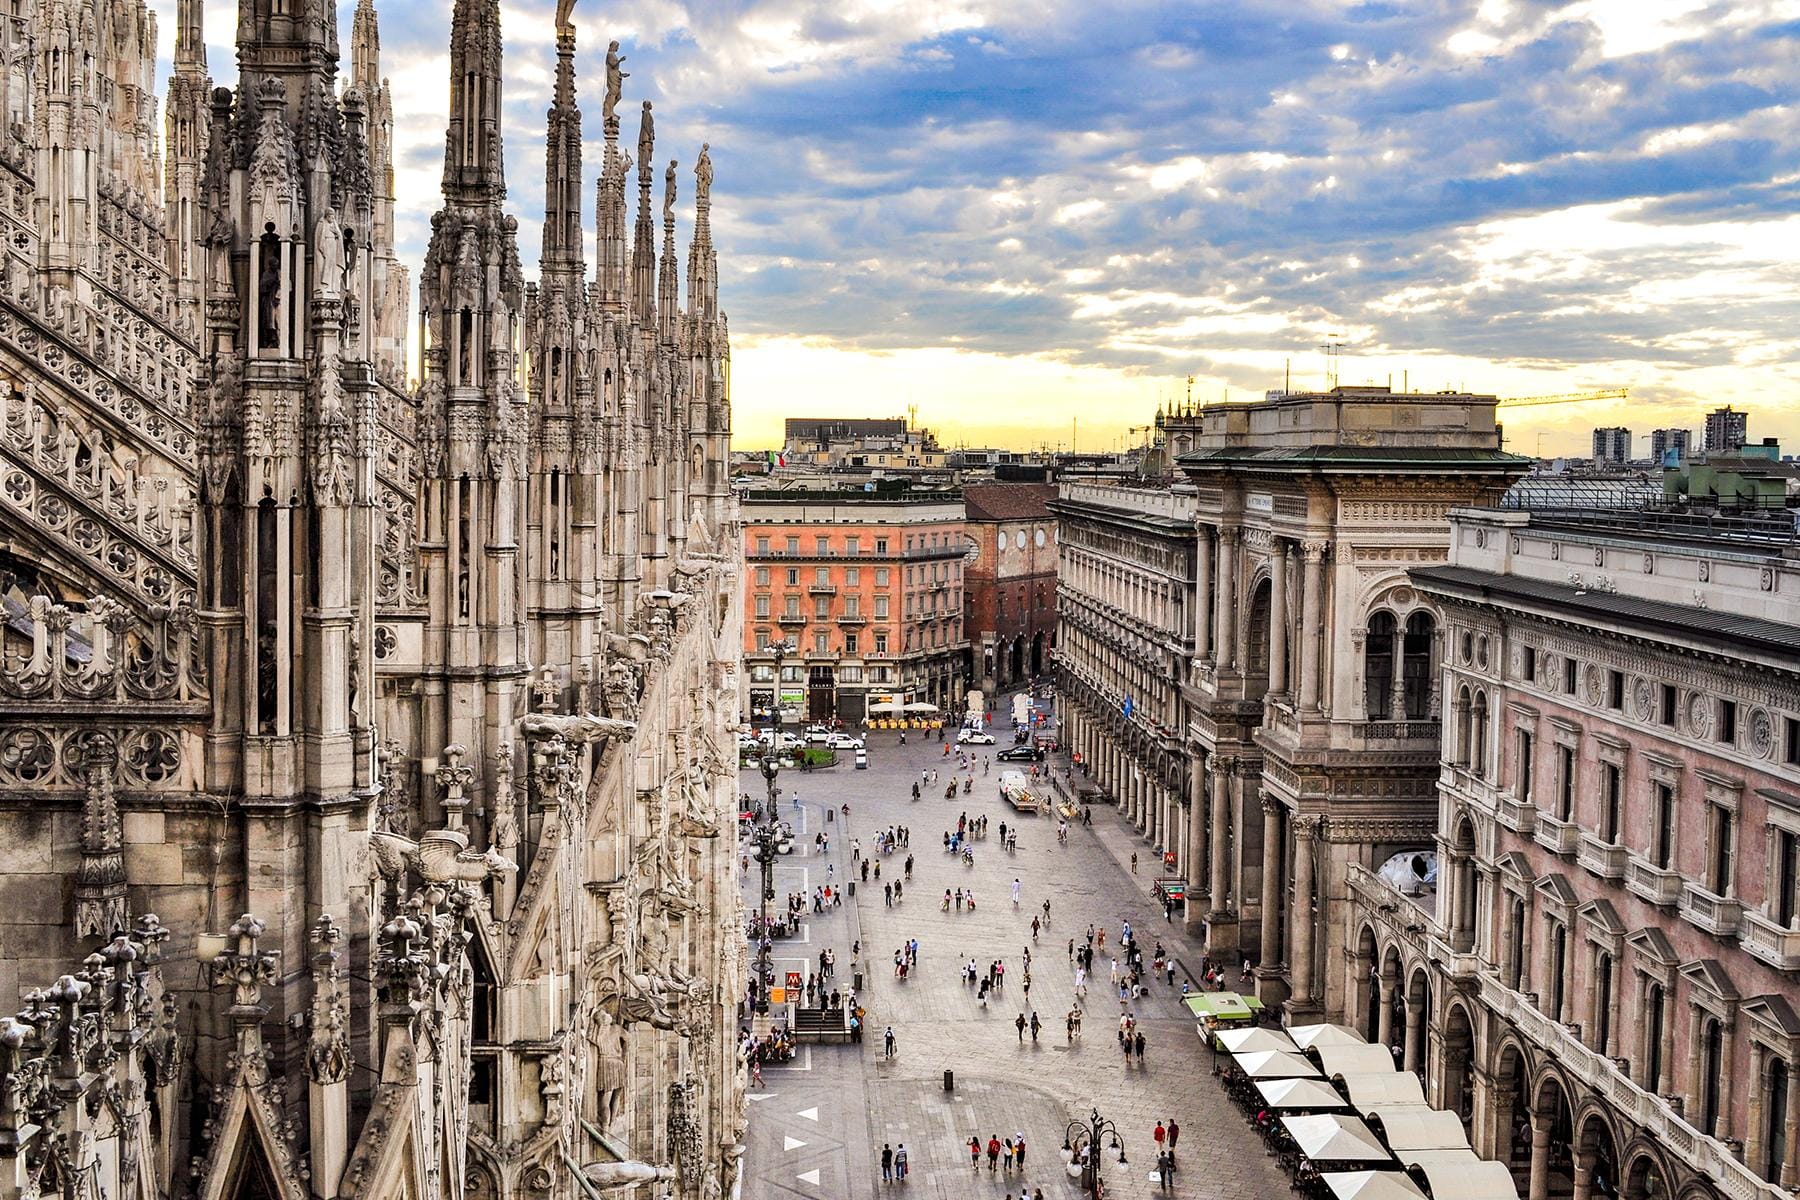 Air Canada launches nonstop, year-round flights from Montreal to Milan